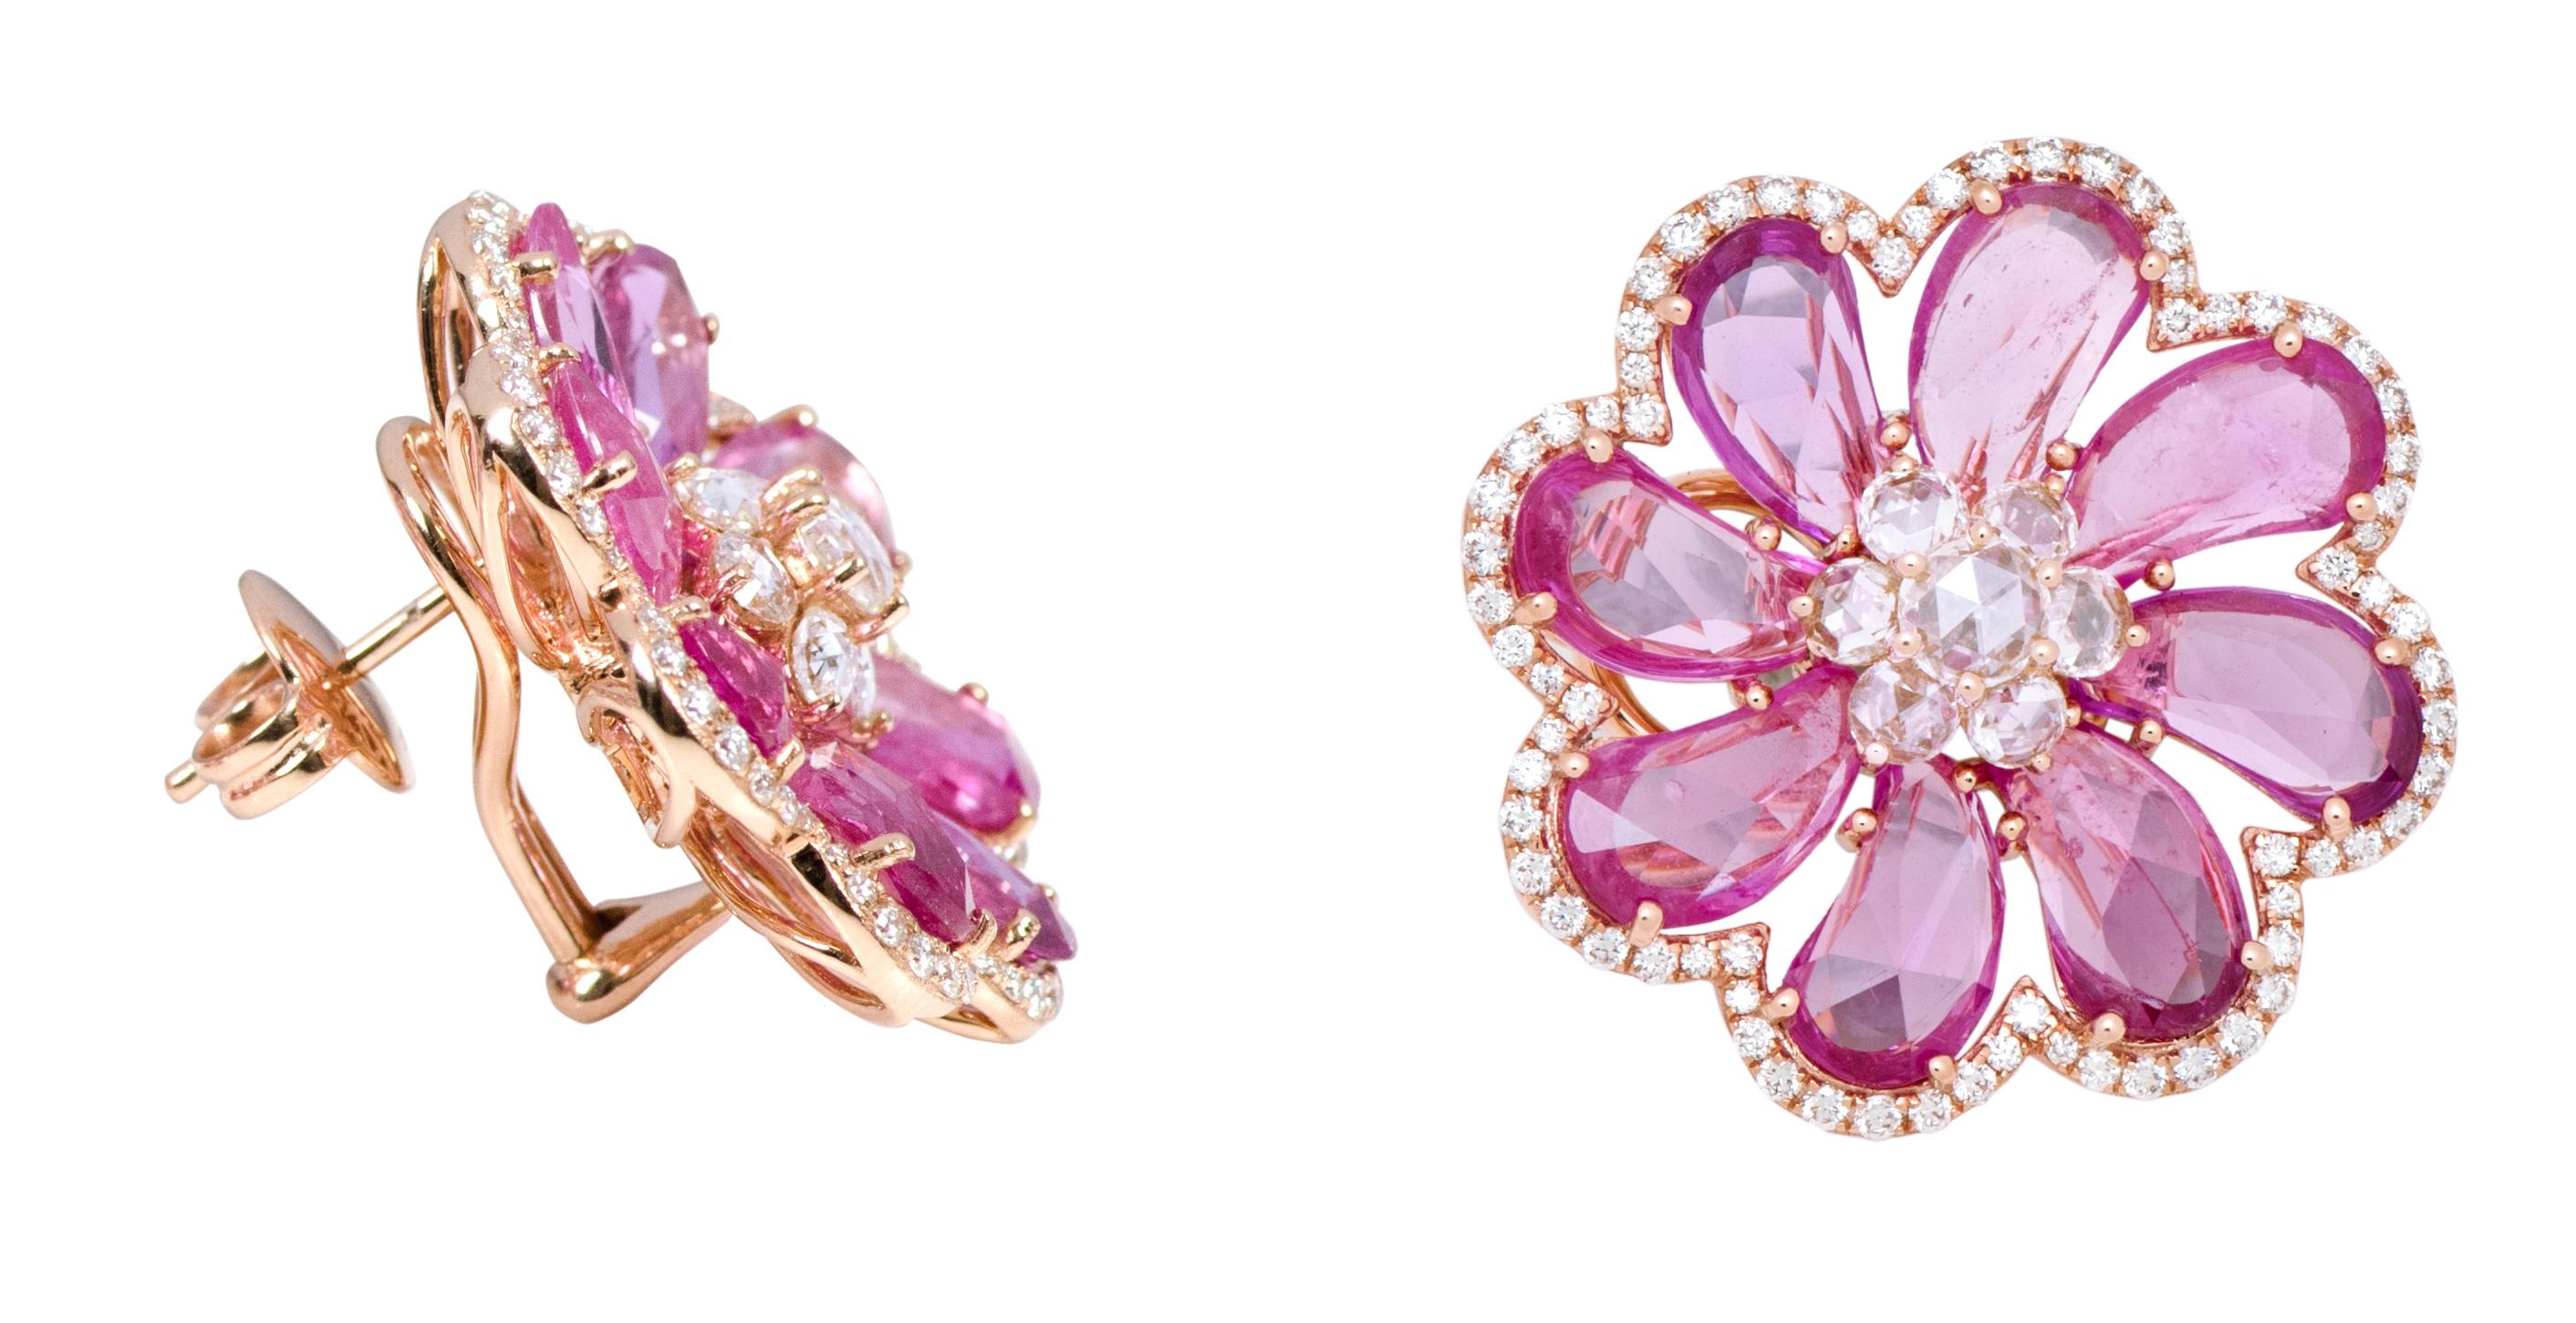 18 Karat Rose Gold 7.24 Carats Pink Sapphire and Diamond Flower Stud Earrings

This set of stud earrings is as gorgeous and refreshing as a beautiful flower that blooms graciously in spring. This brilliant blue sapphire and diamond set of stud